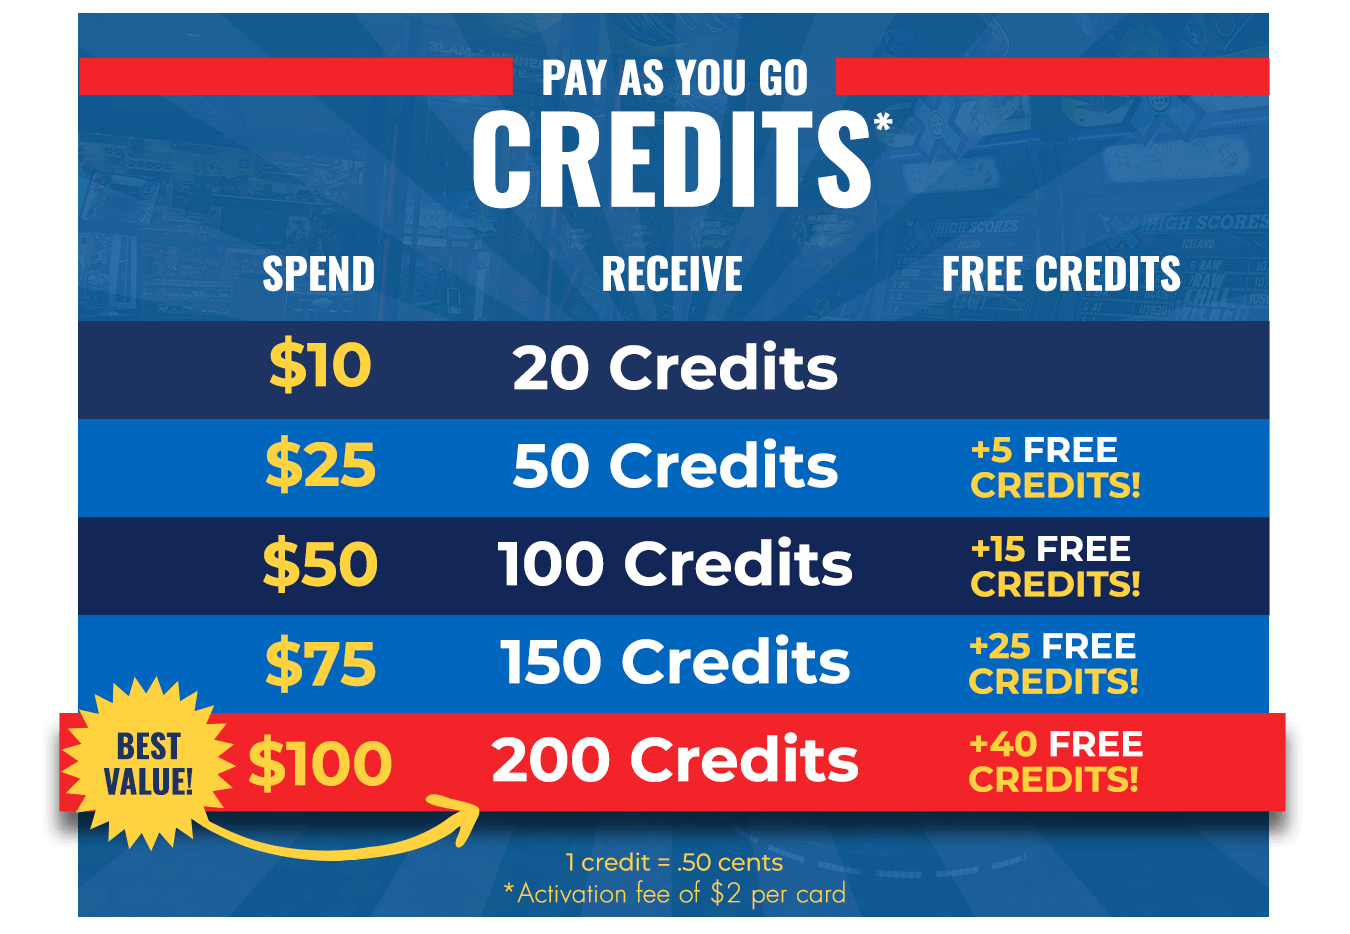 Pay as you go credits